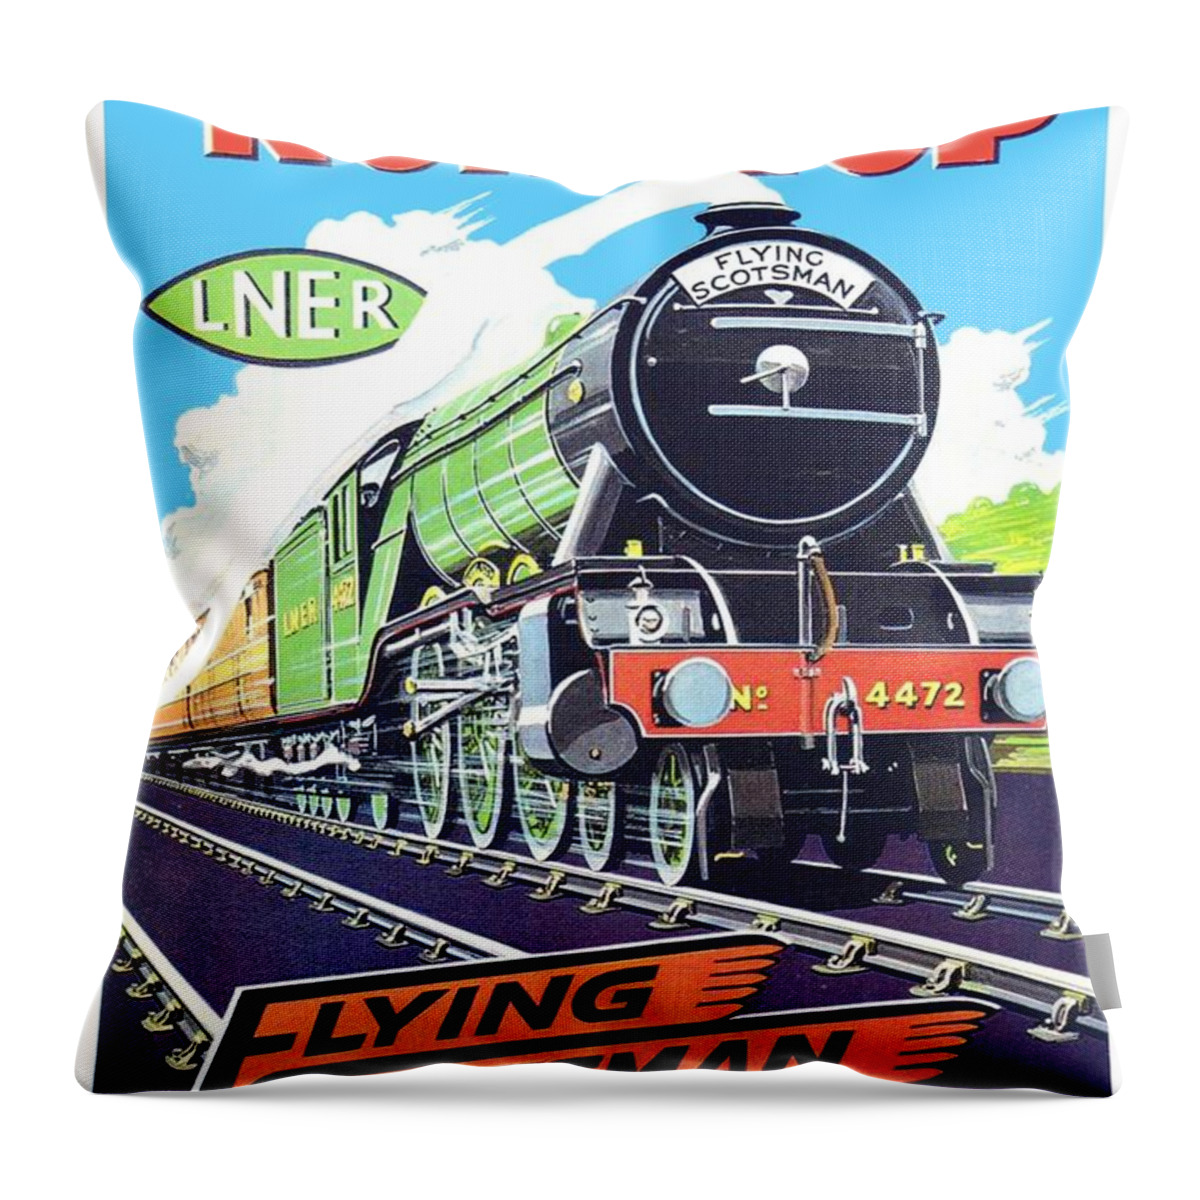 The Throw Pillow featuring the digital art 1934 - The Flying Scotsman Railroad Advertisement - Color by John Madison